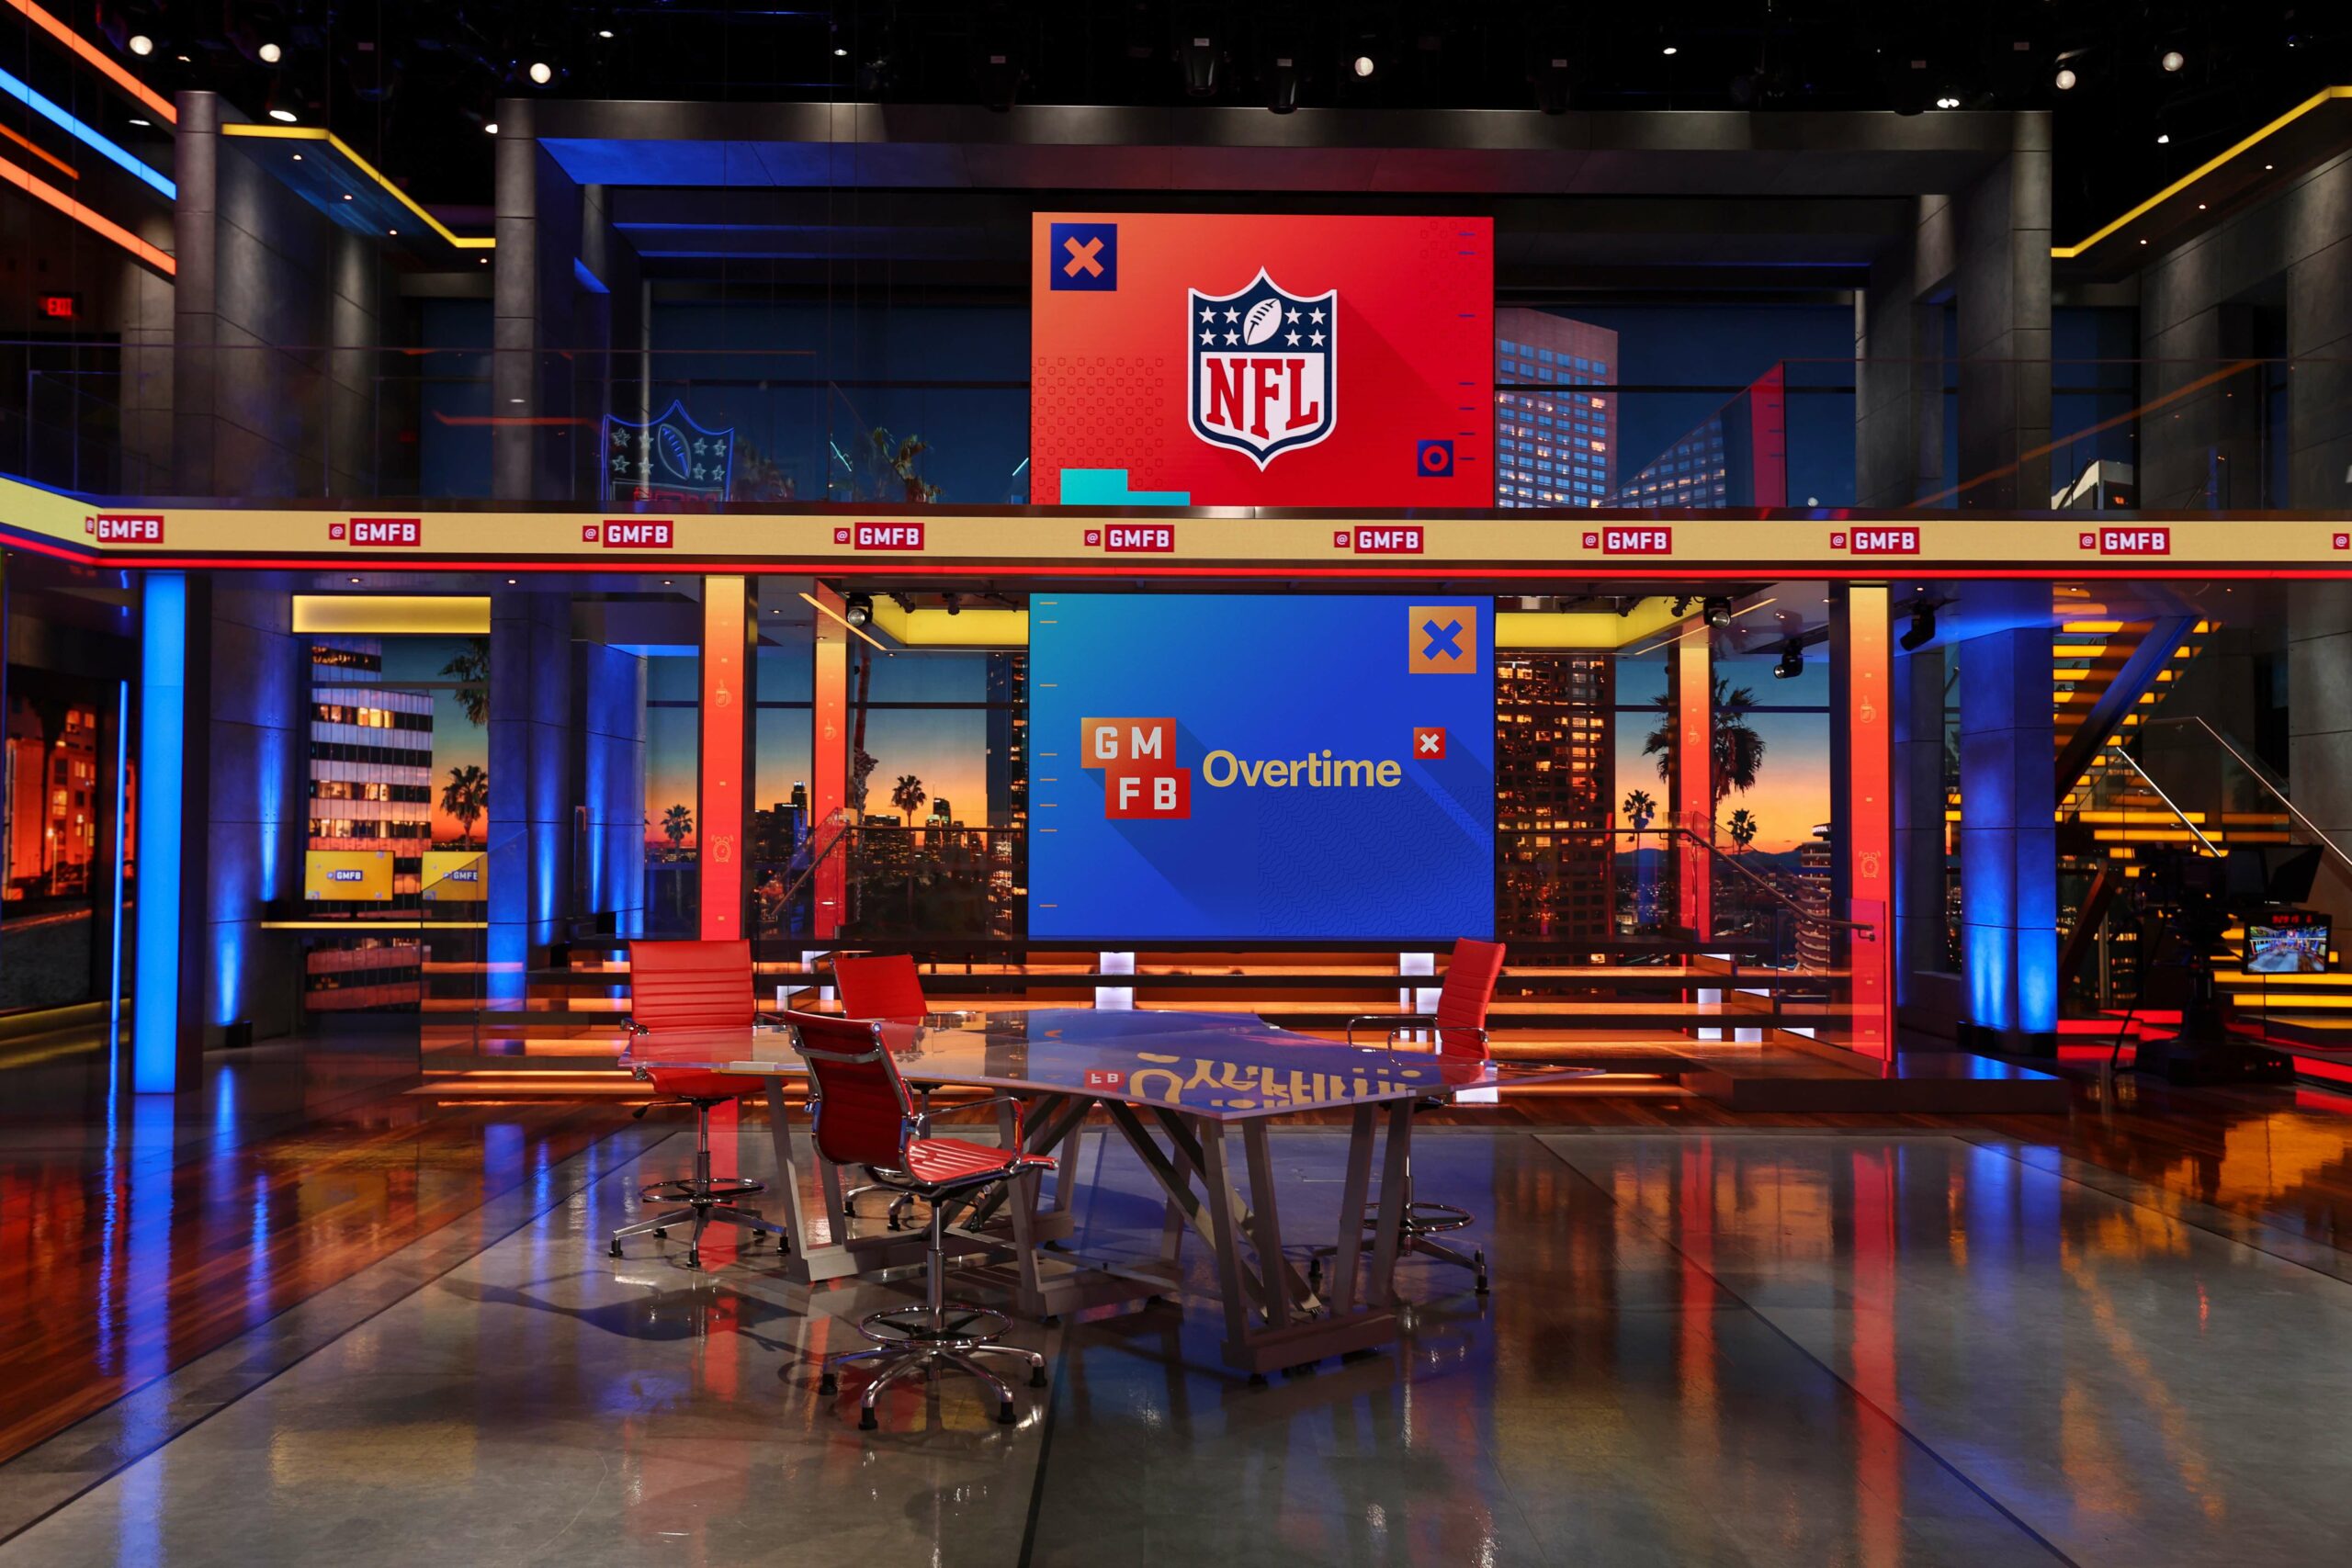 Roku and Sony Pictures Television Team Up for “GMFB: Overtime”